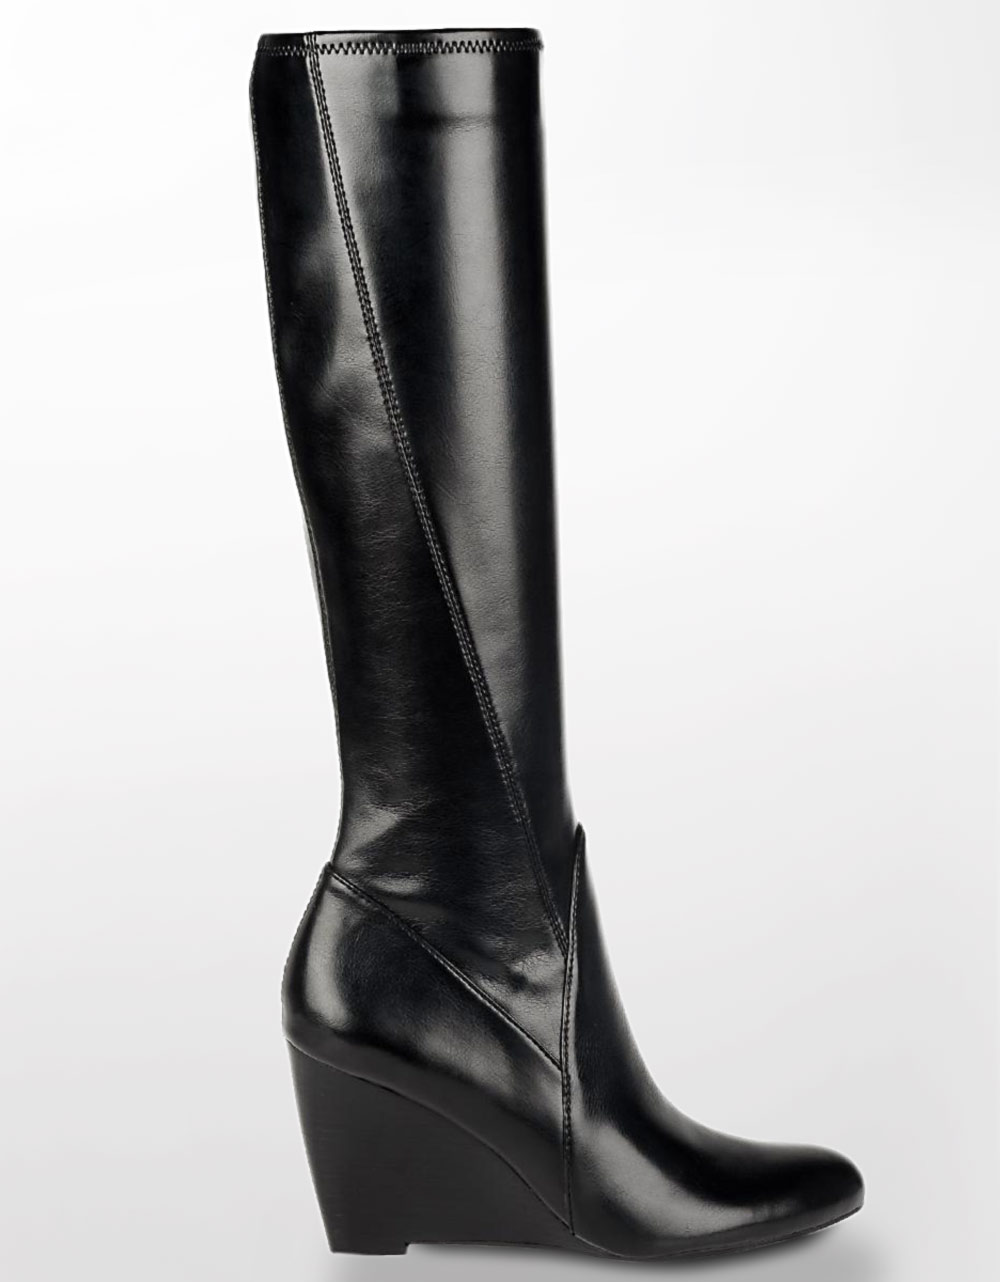 Lyst - Franco sarto Vent Leather Wedge Boots in Black